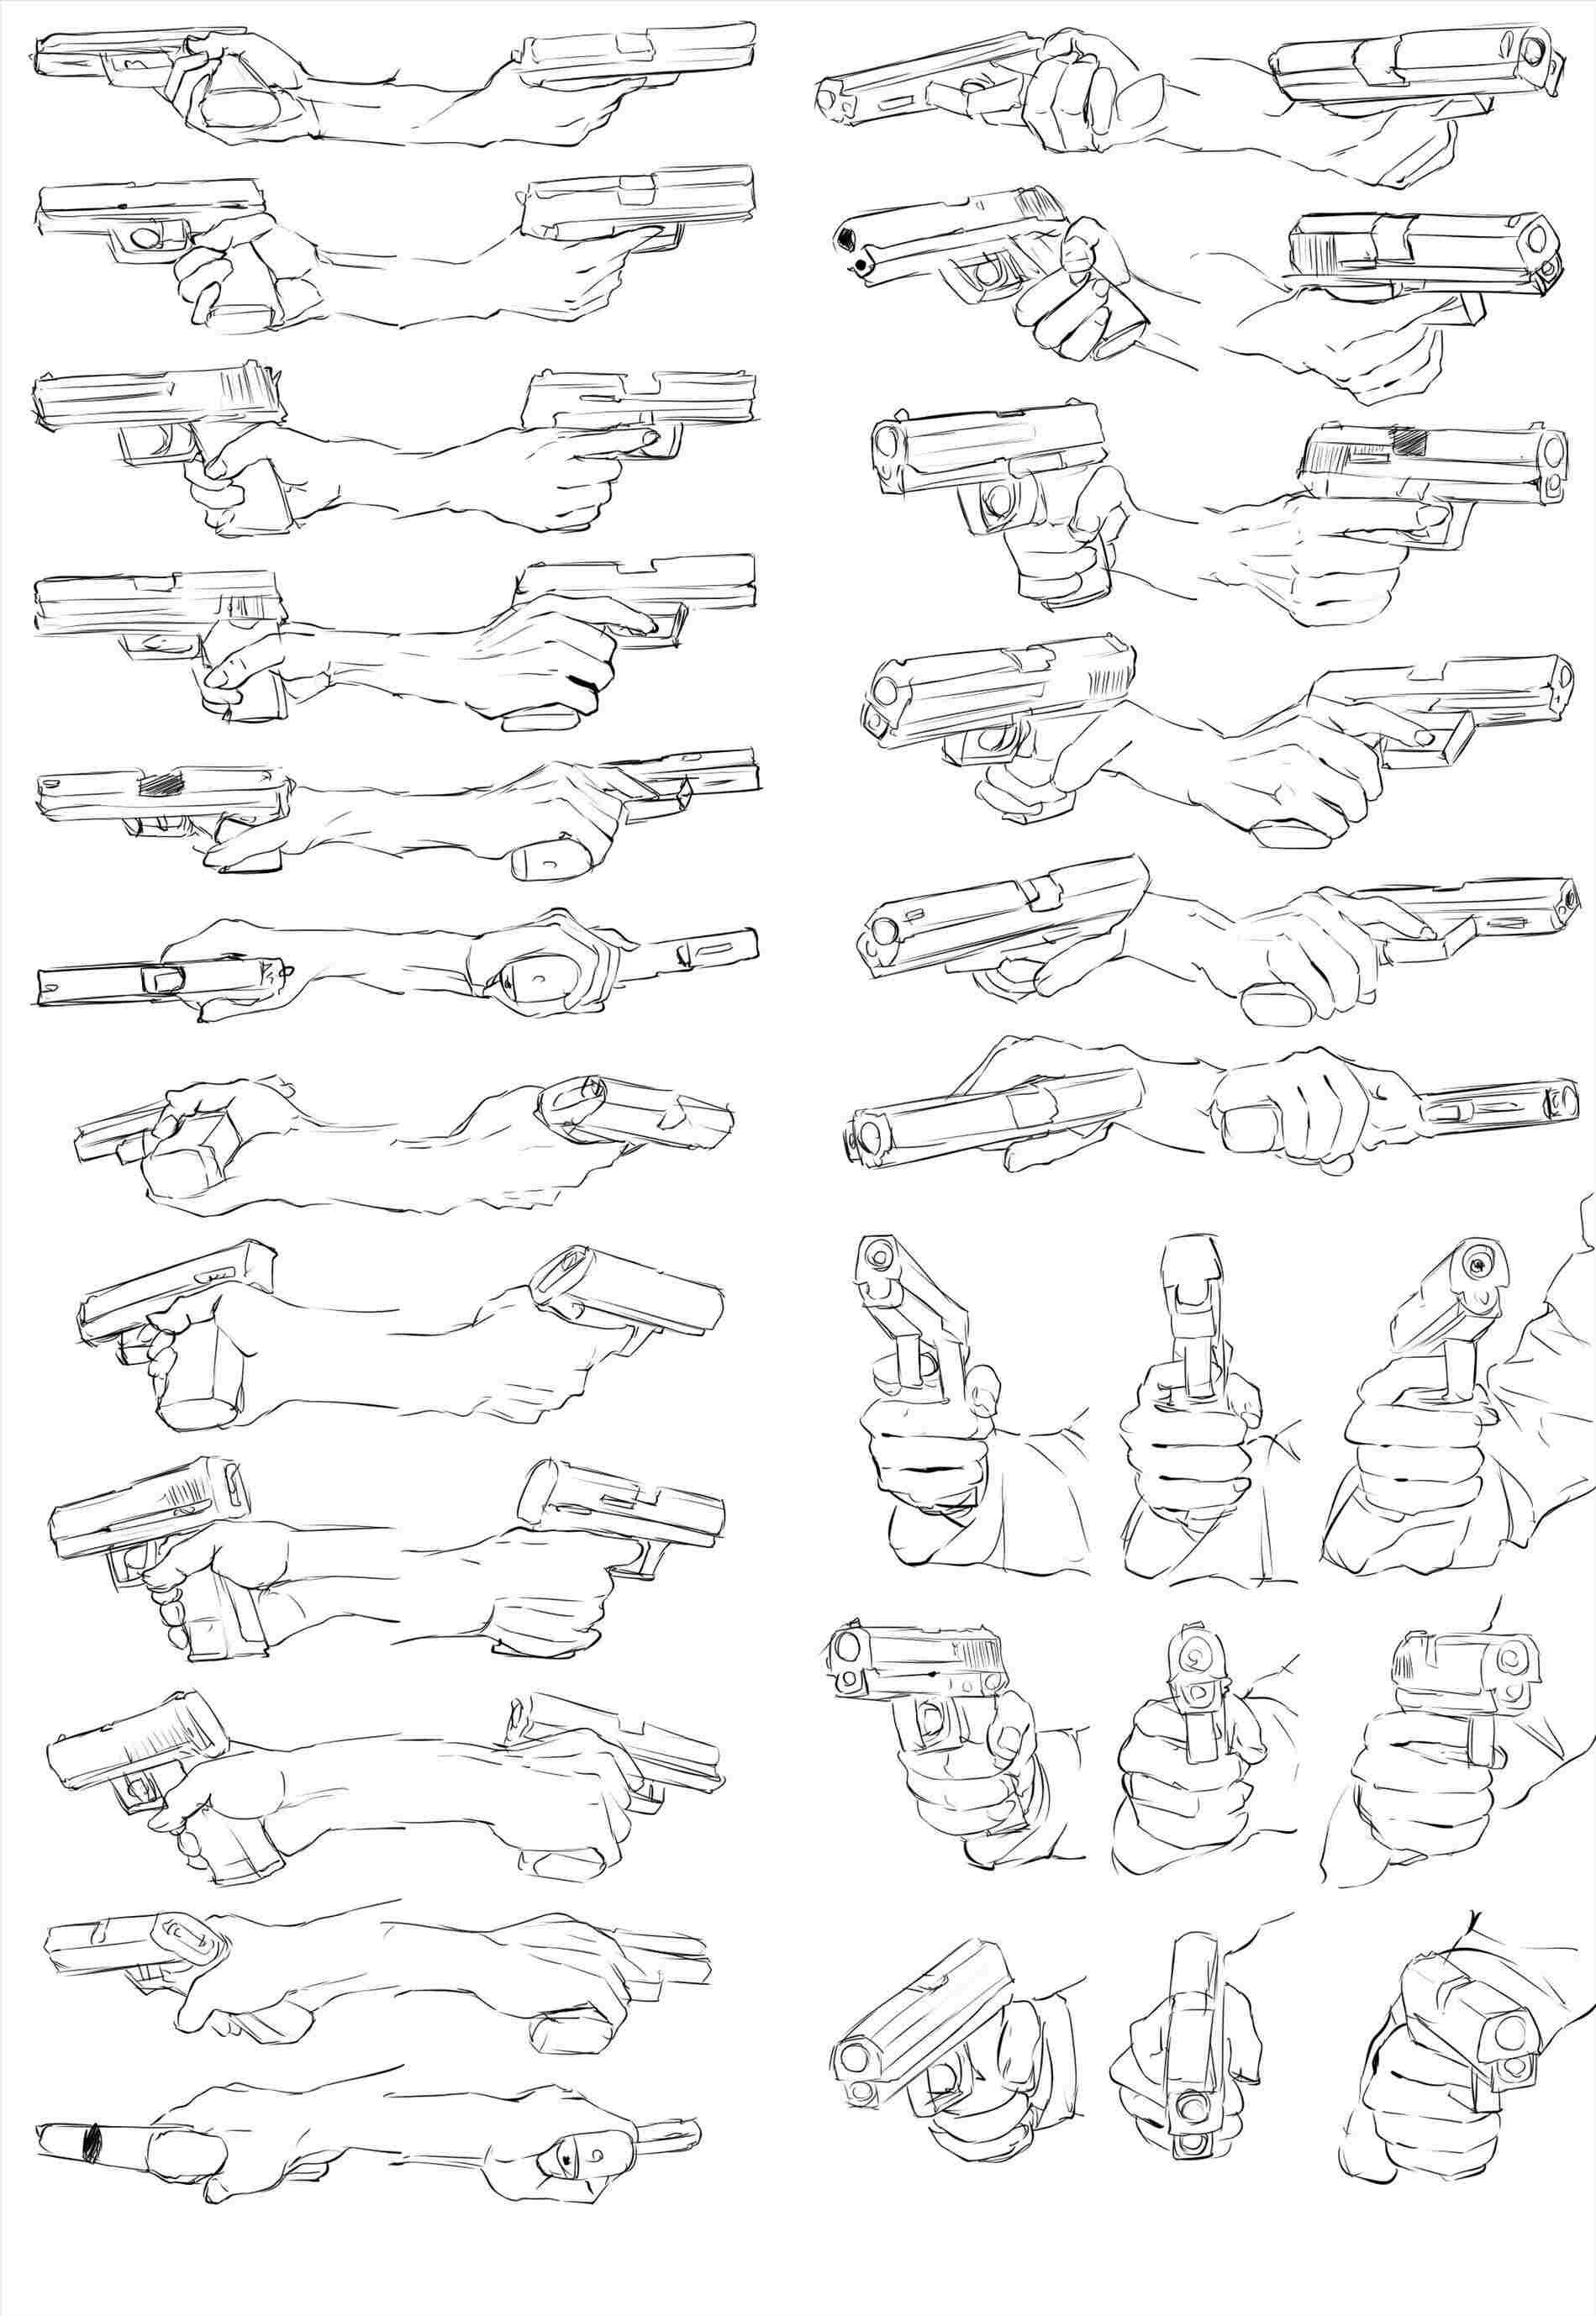 Hand Holding Gun Drawing References.